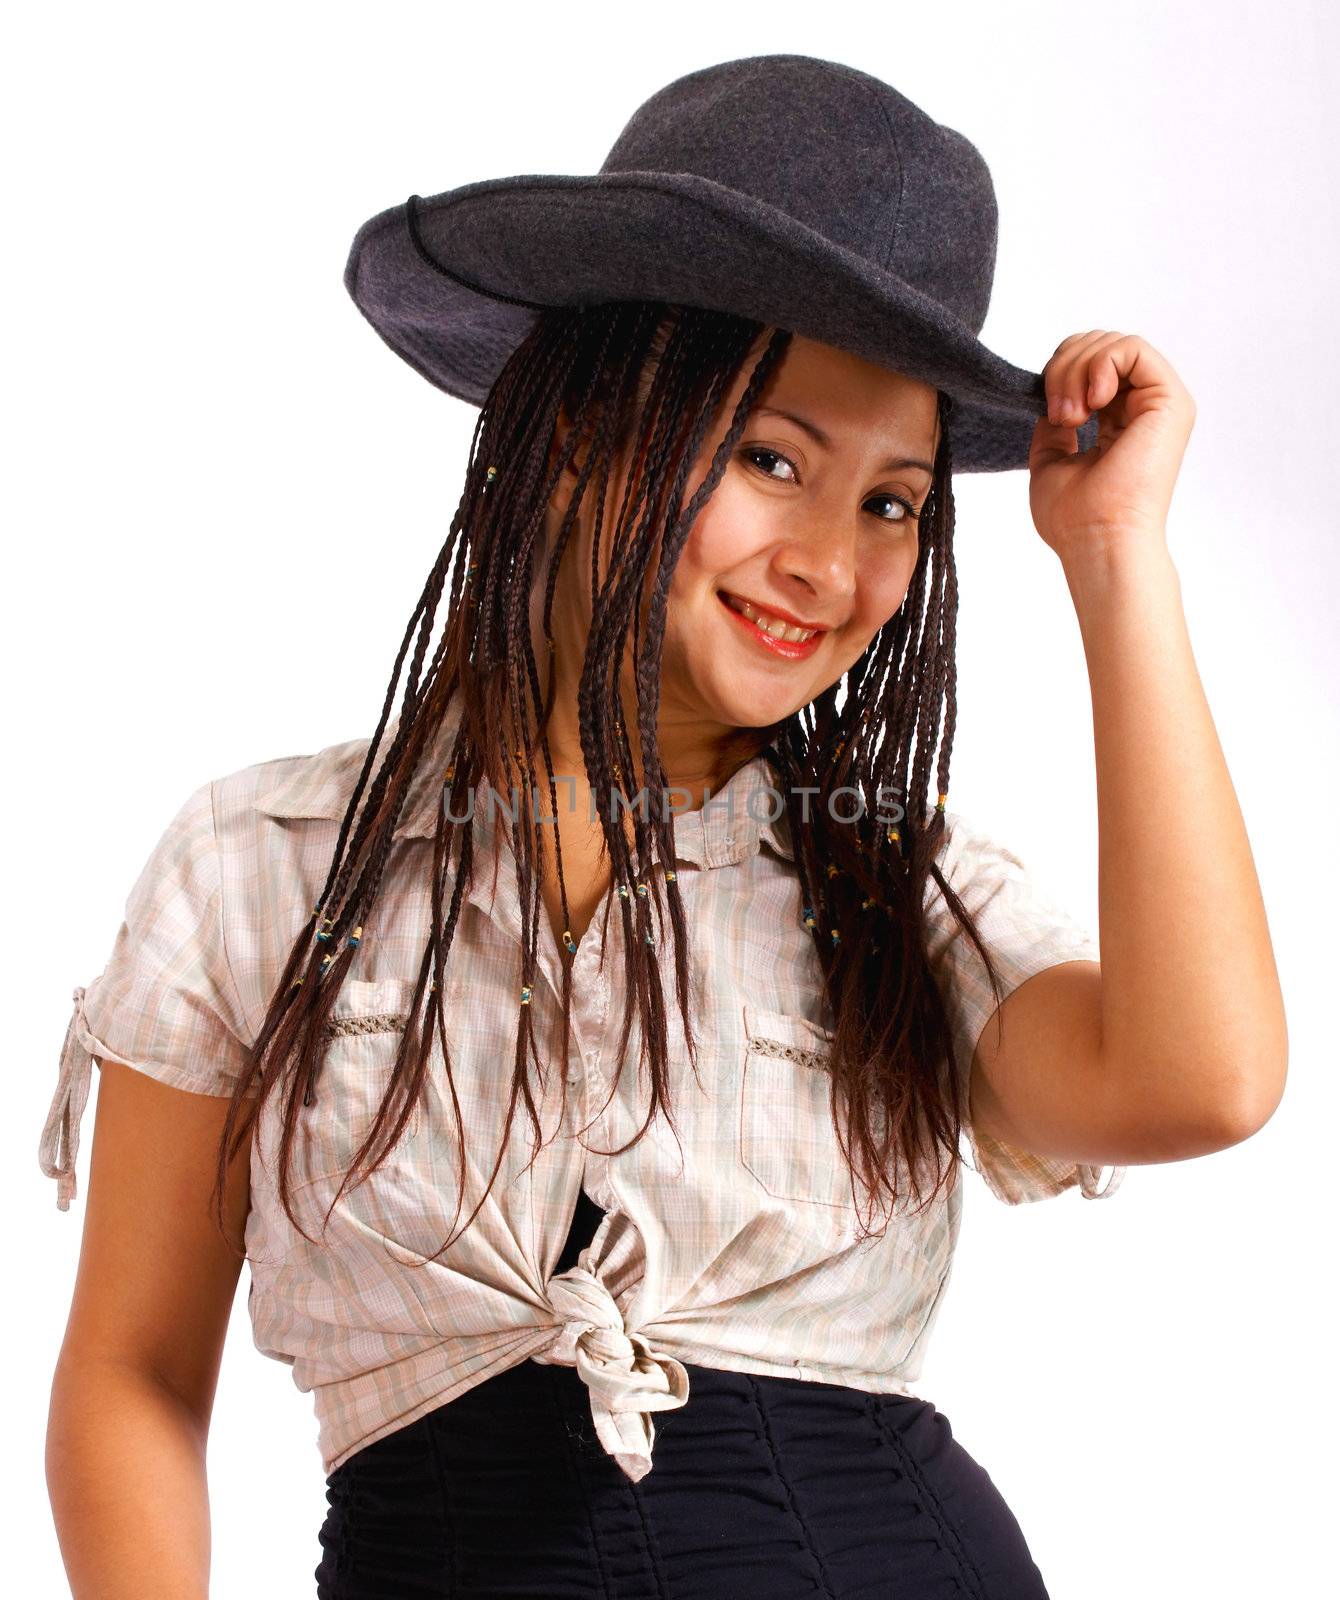 Smiling Cowgirl With Western Hat